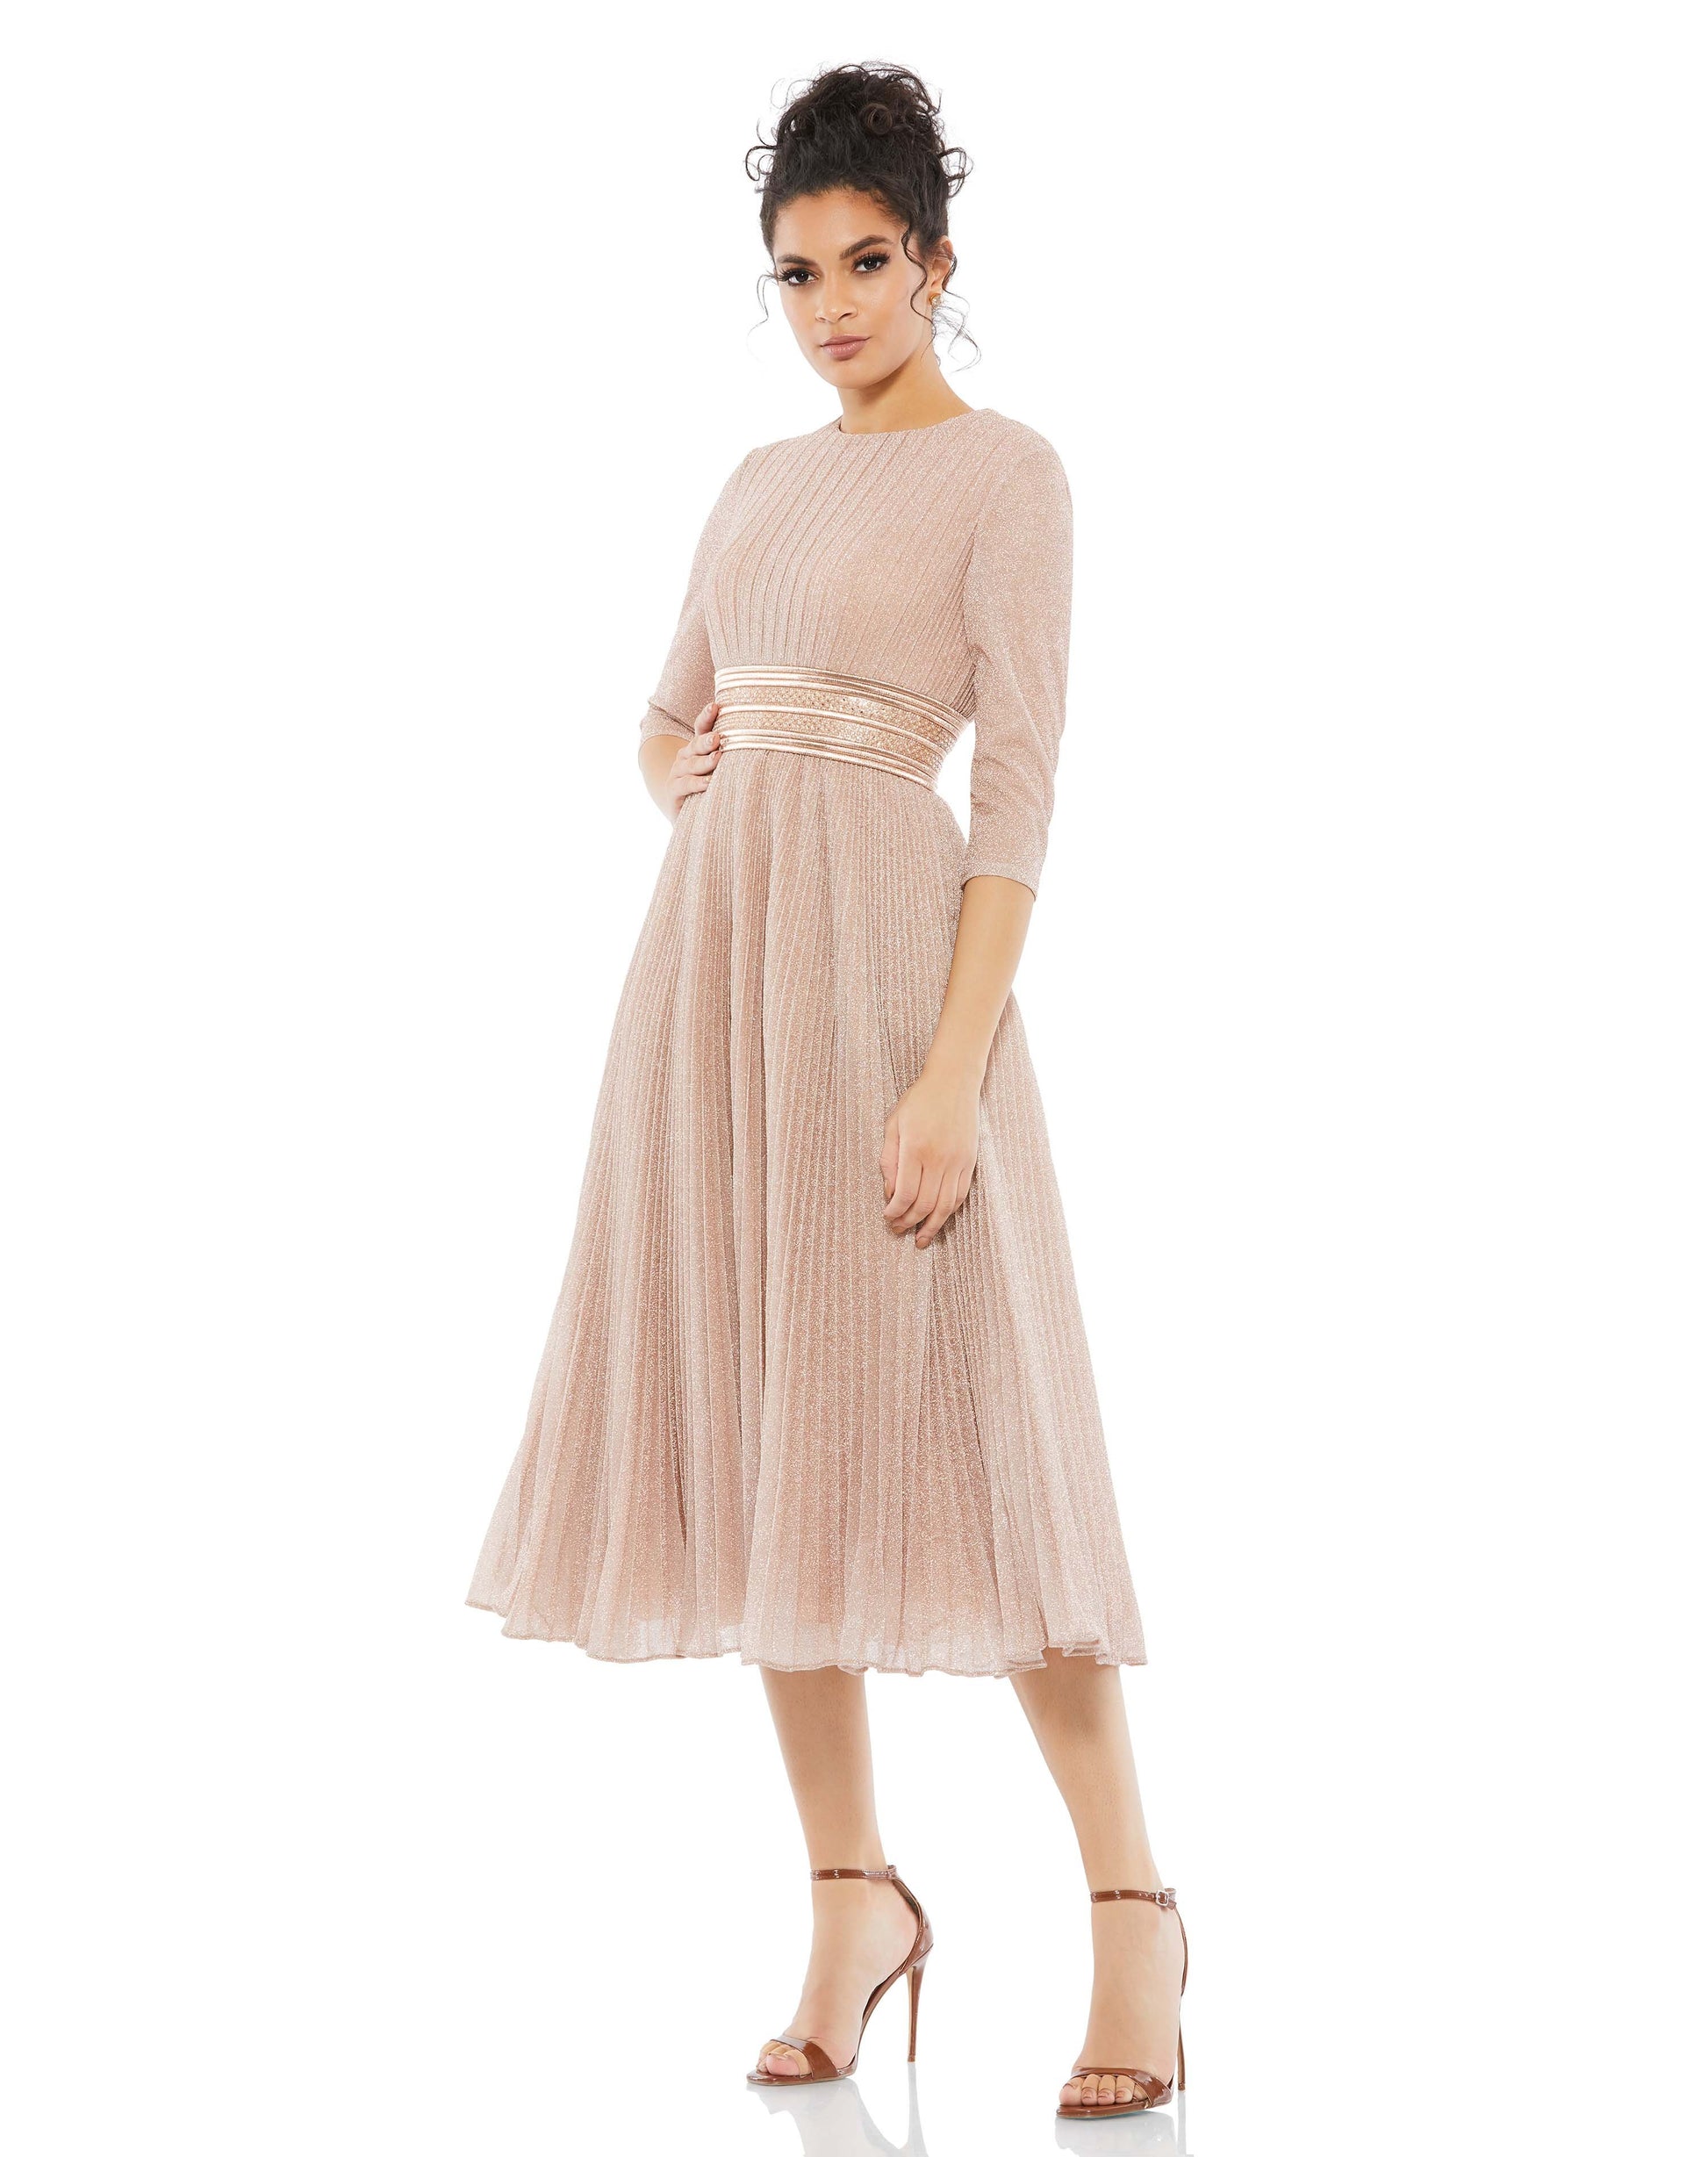 Elegant 3/4 sleeve dress with an a-line pleated tea-length skirt, round neckline, and a dramatic embellished waistband. Mac Duggal Fully Lined 100% Polyester High Neck 3/4 Sleeve Midi Length Style #30750